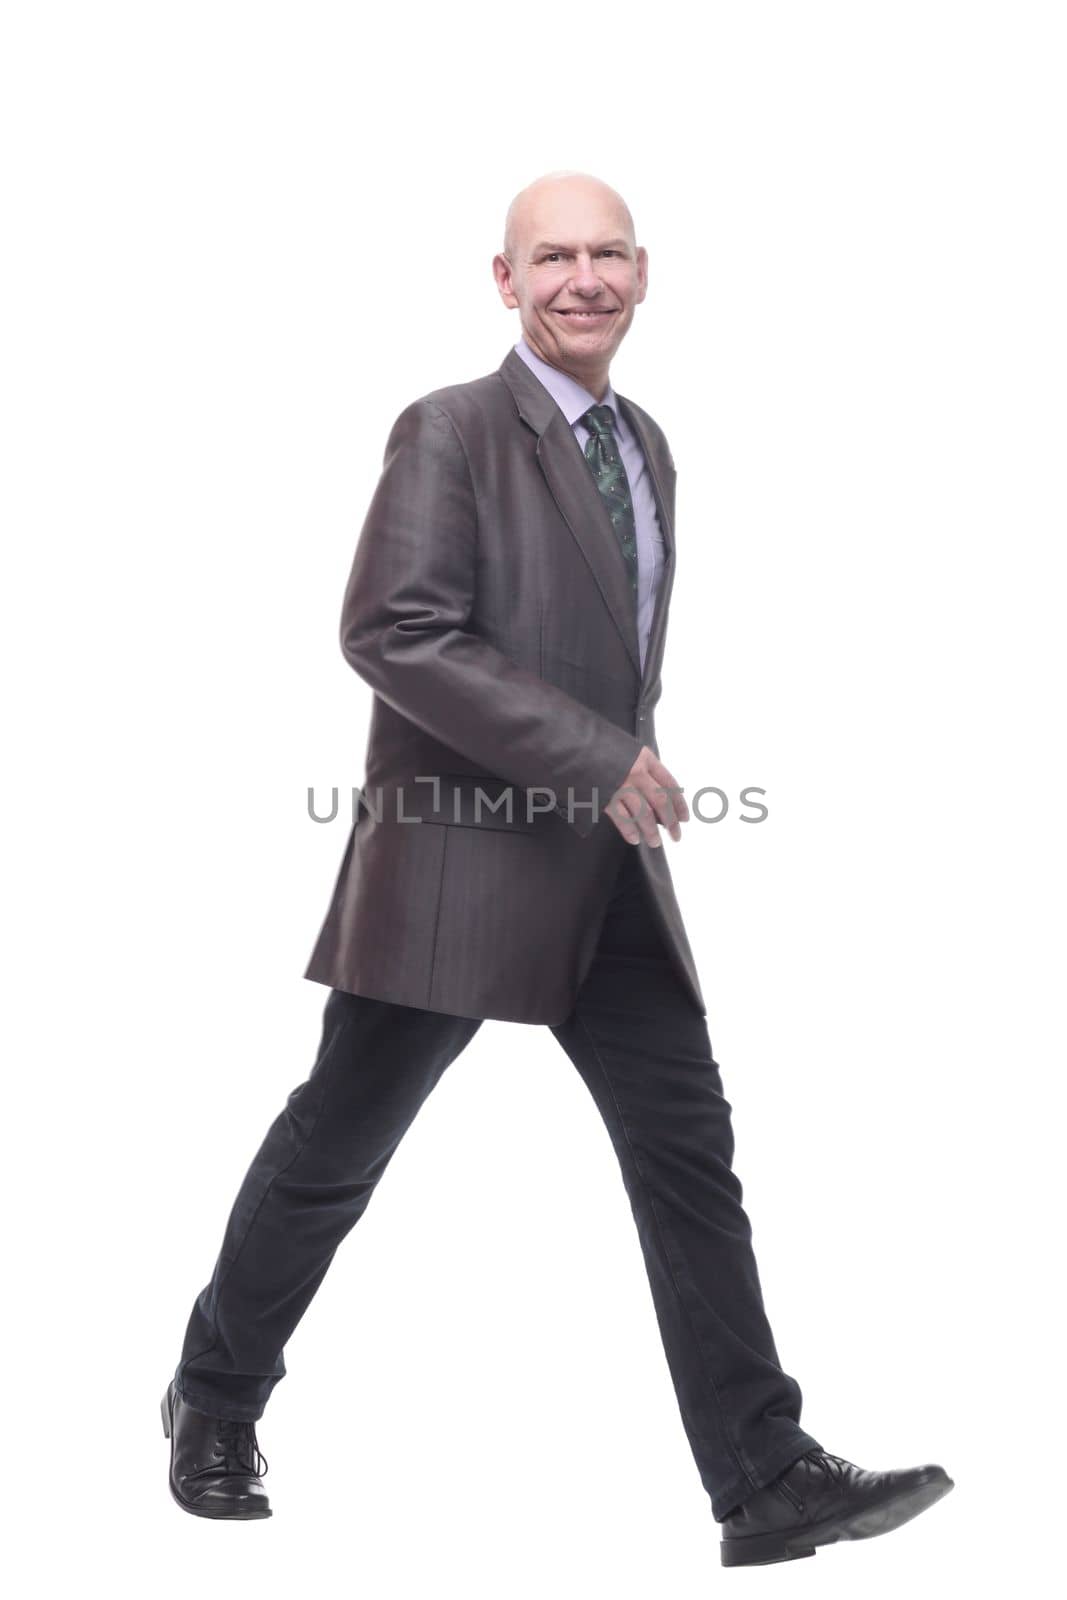 in full growth. Executive business man striding forward . isolated on a white background.